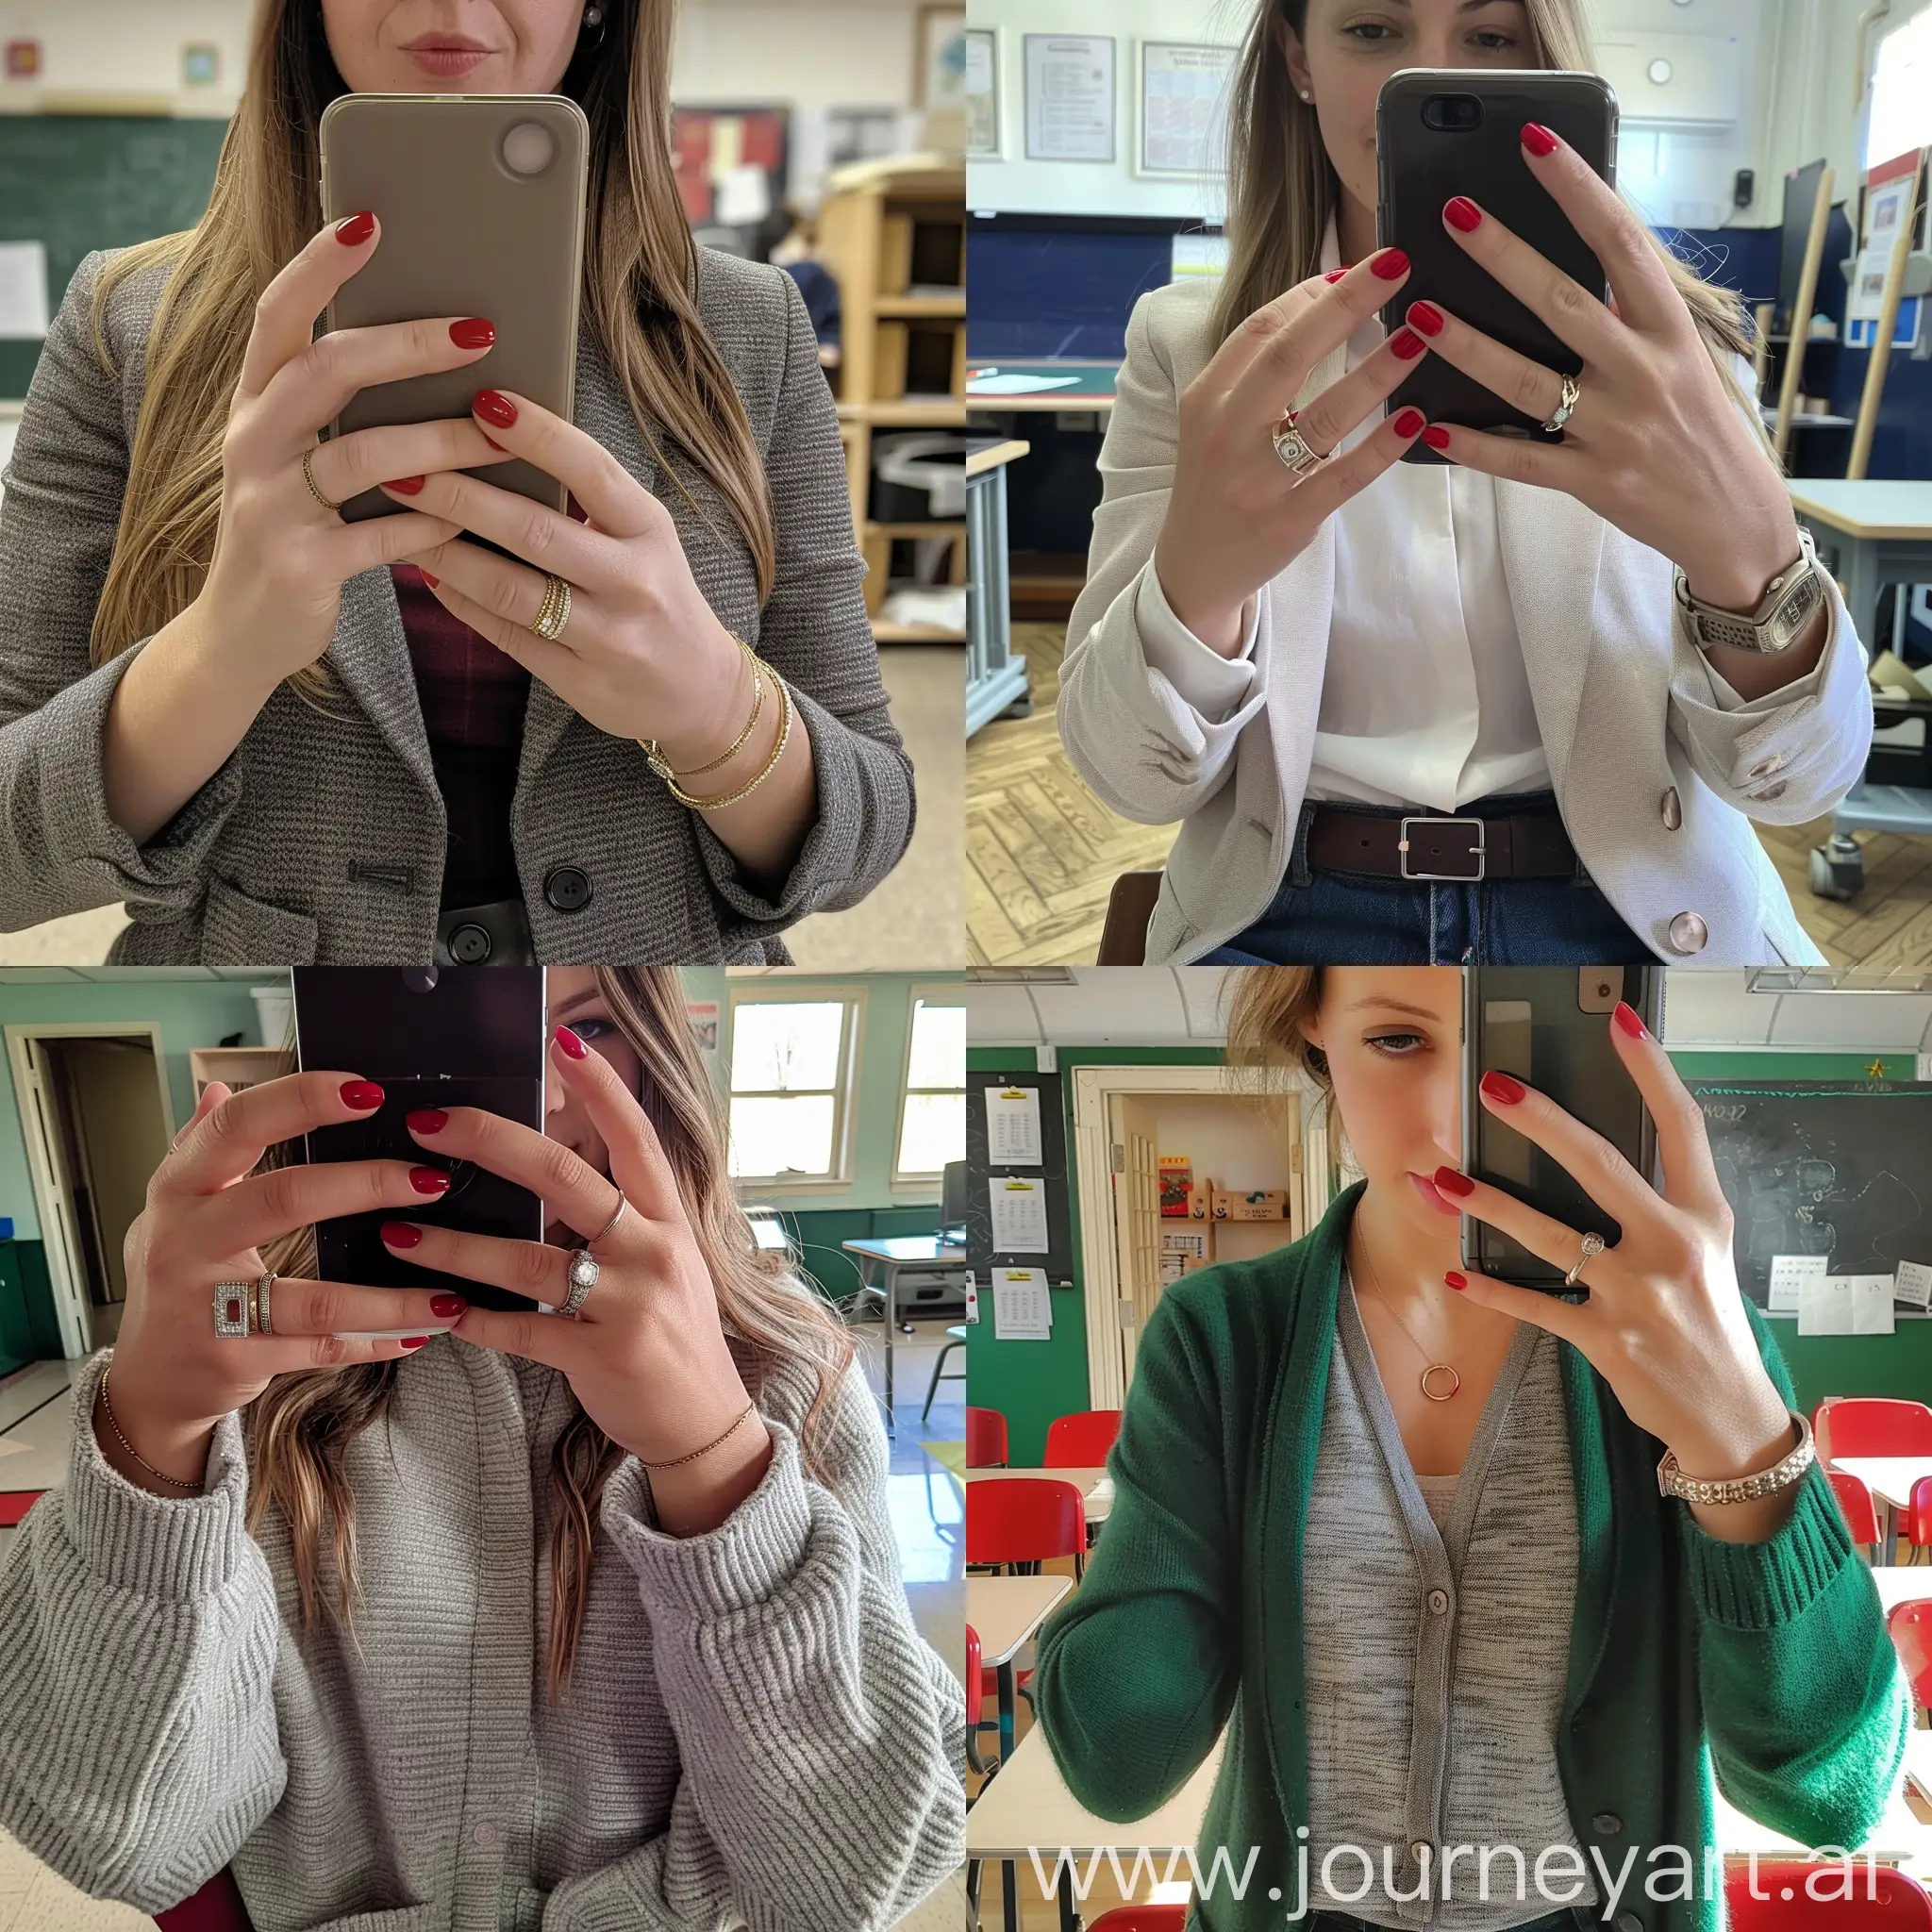 A female school teacher taking a selfie in her classroom, ordinary woman, ordinary clothing, red gel nail polish, taking a close up selfie, wedding ring, young, mid 20's